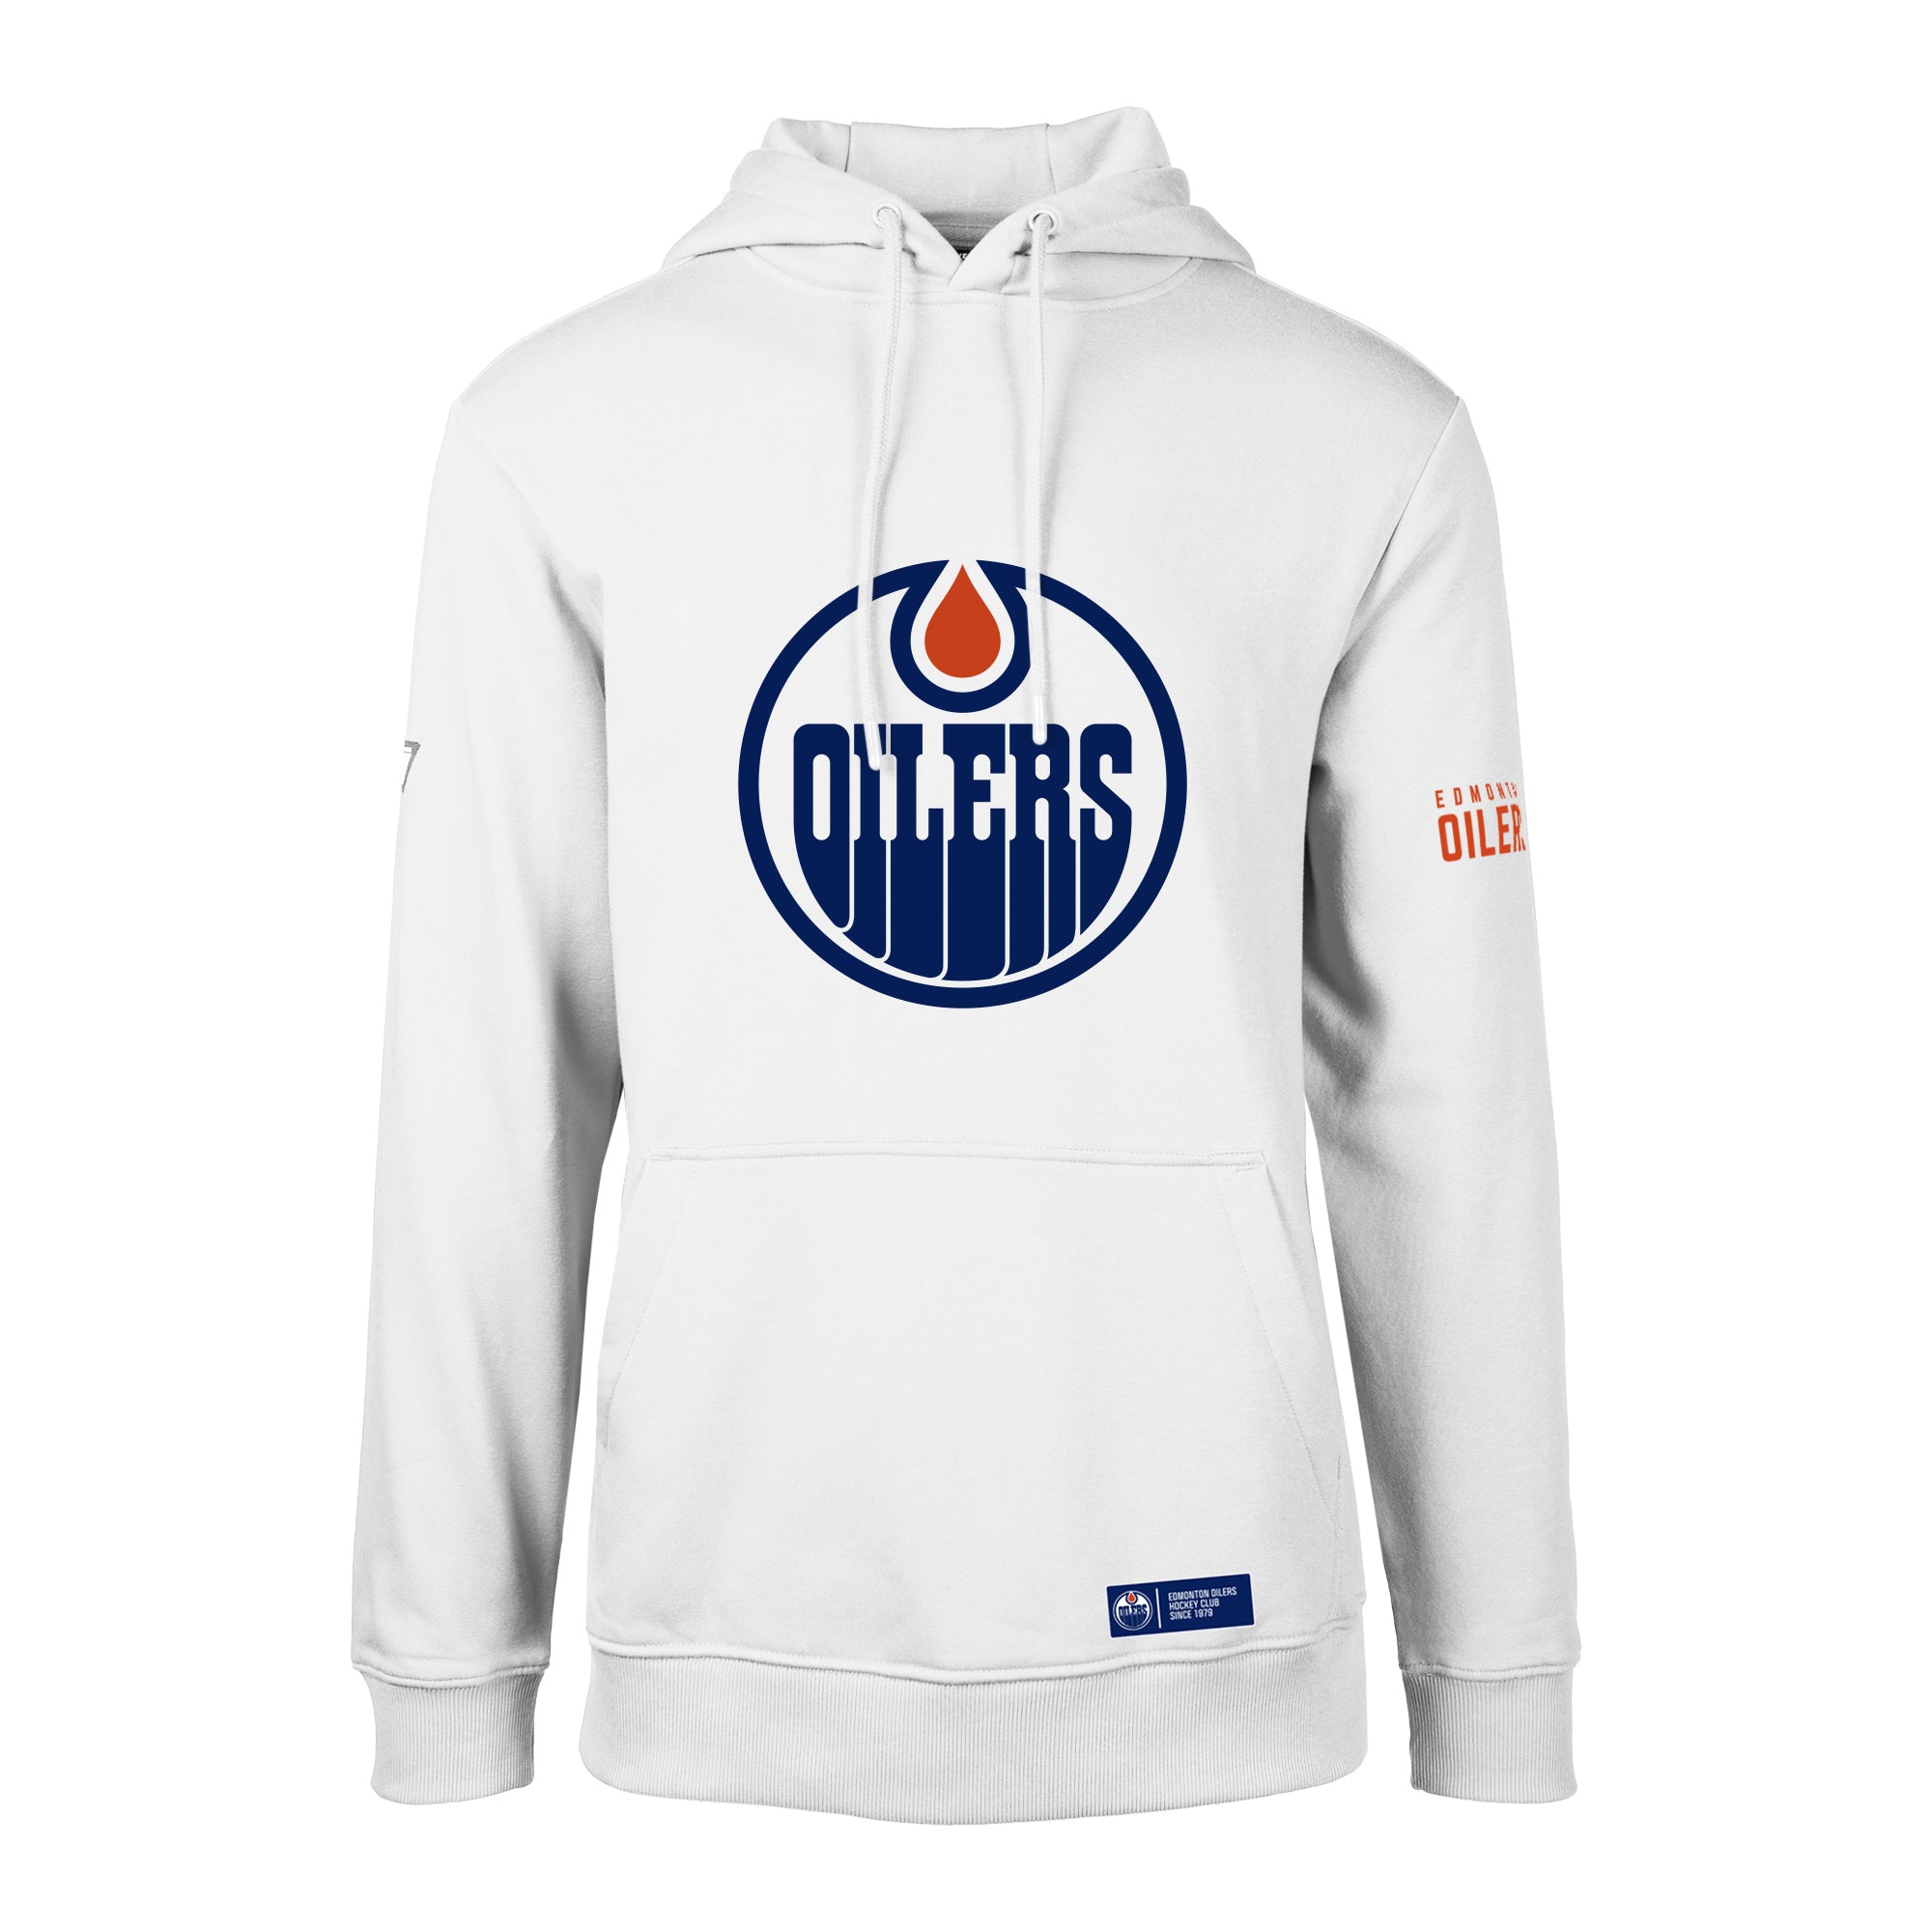 Levelwear Edmonton Oilers Women's White Solstice Medium Weight Jacket, White, 64% POLY/36% Cot, Size S, Rally House